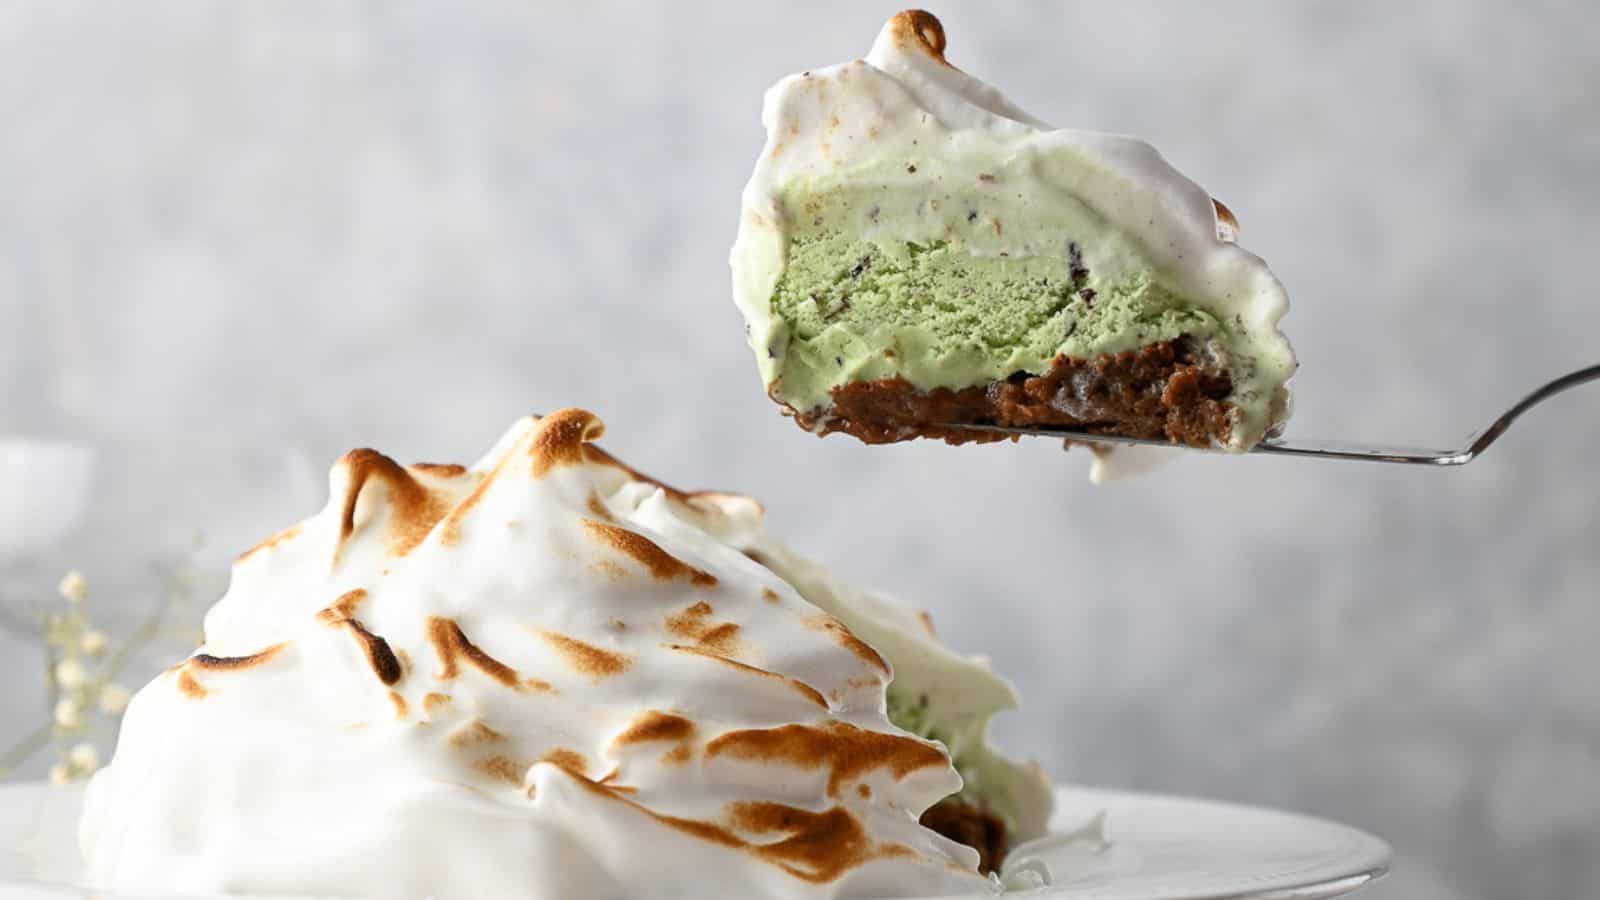 A slice of baked Alaska on a cake slice above the pie with a slice removed.